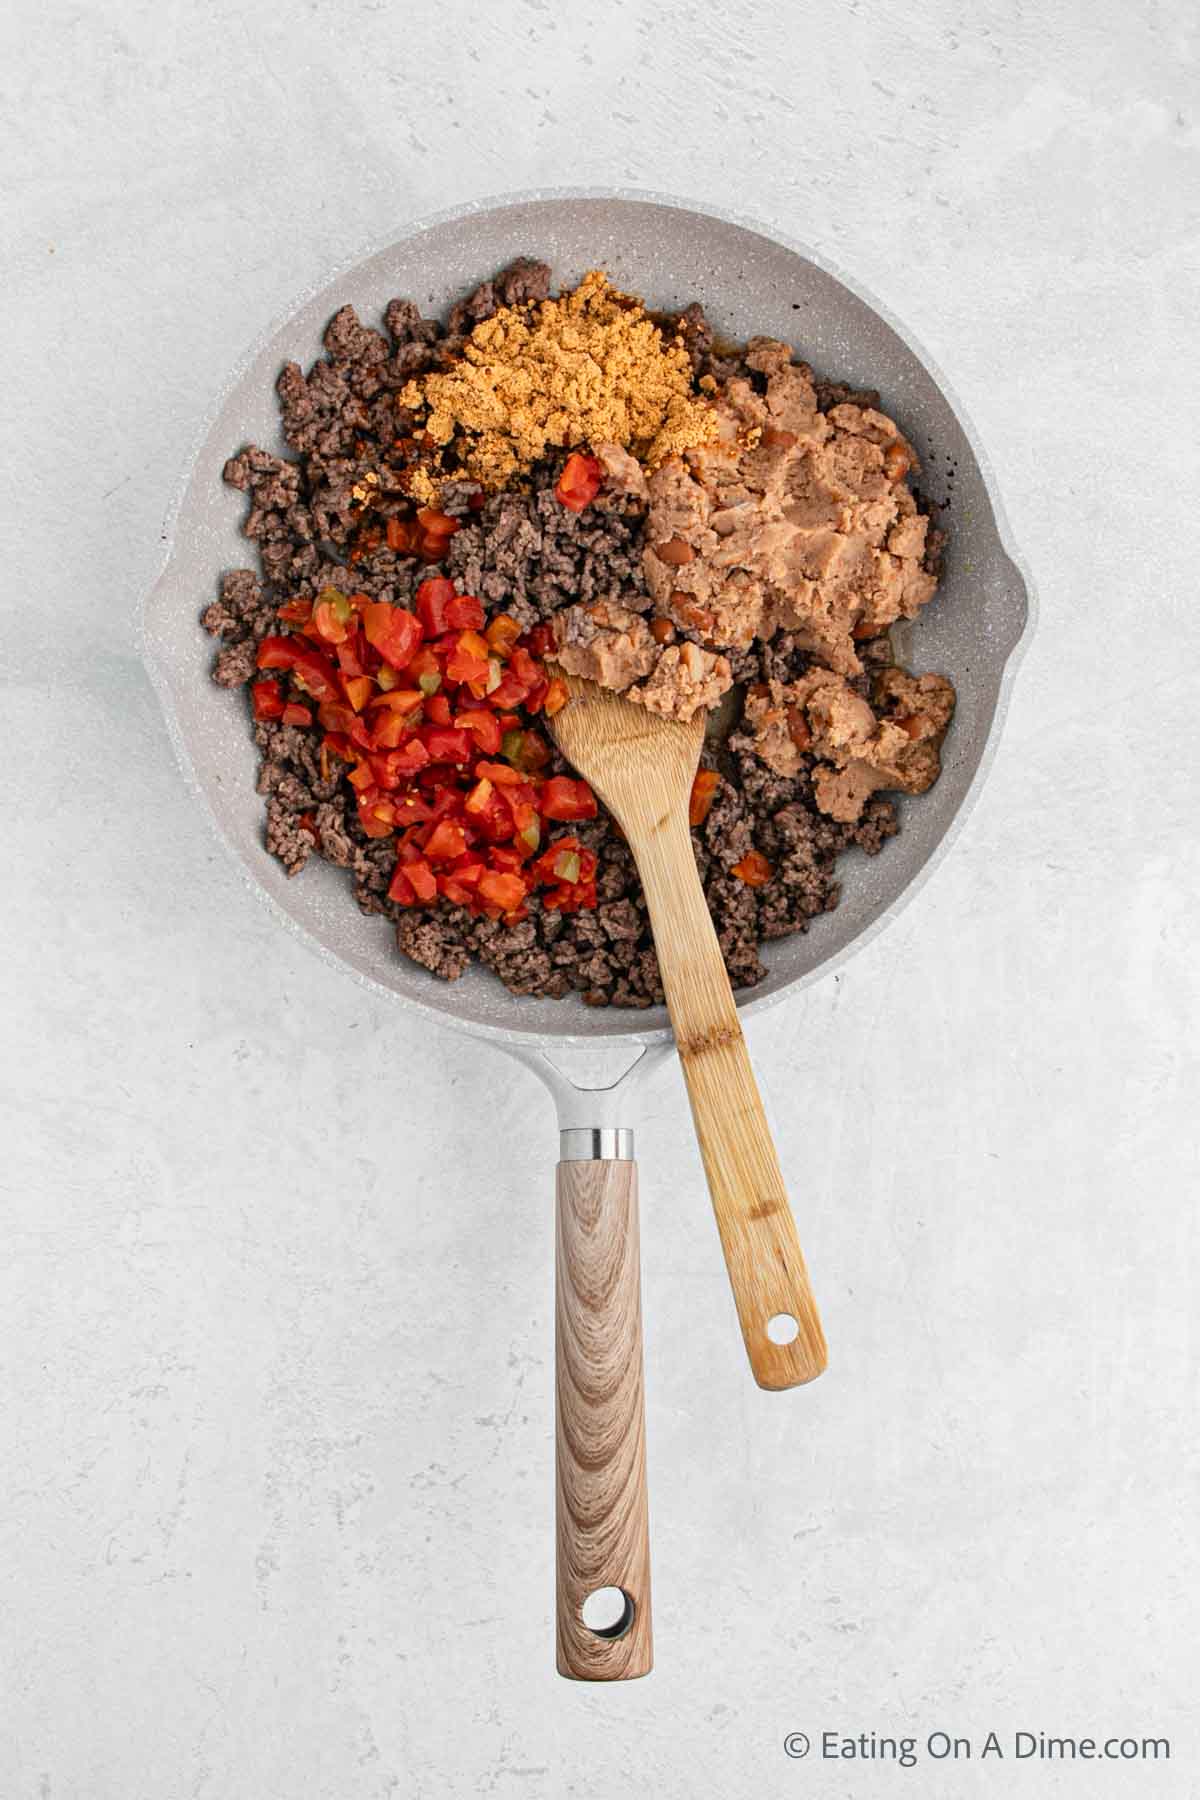 Combining the ground beef mixture in a skillet with a wooden spoon